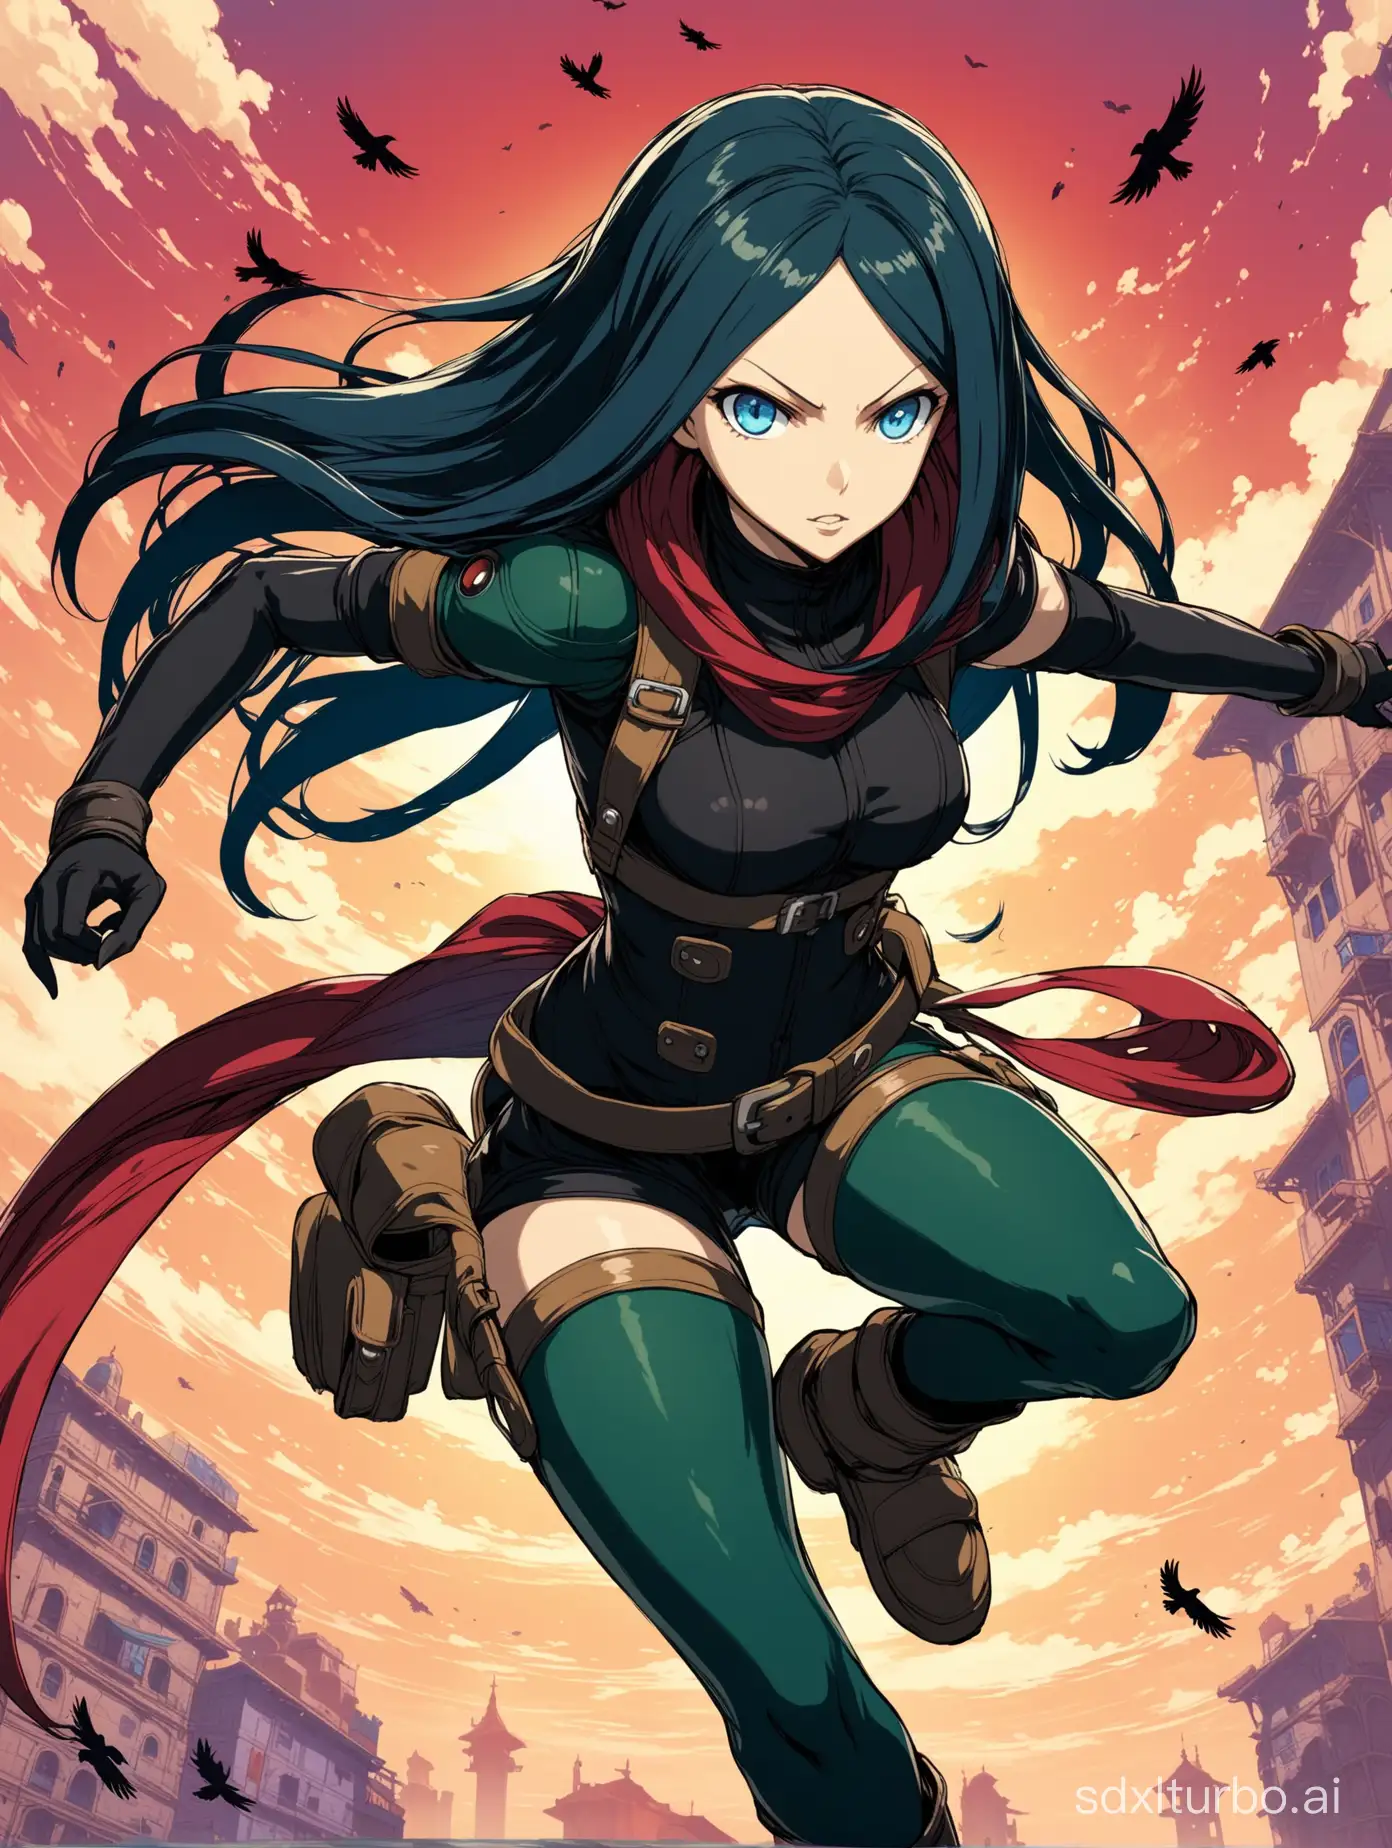 raven from gravity rush 2, black long hair with red strands, blue eyes, in action pose